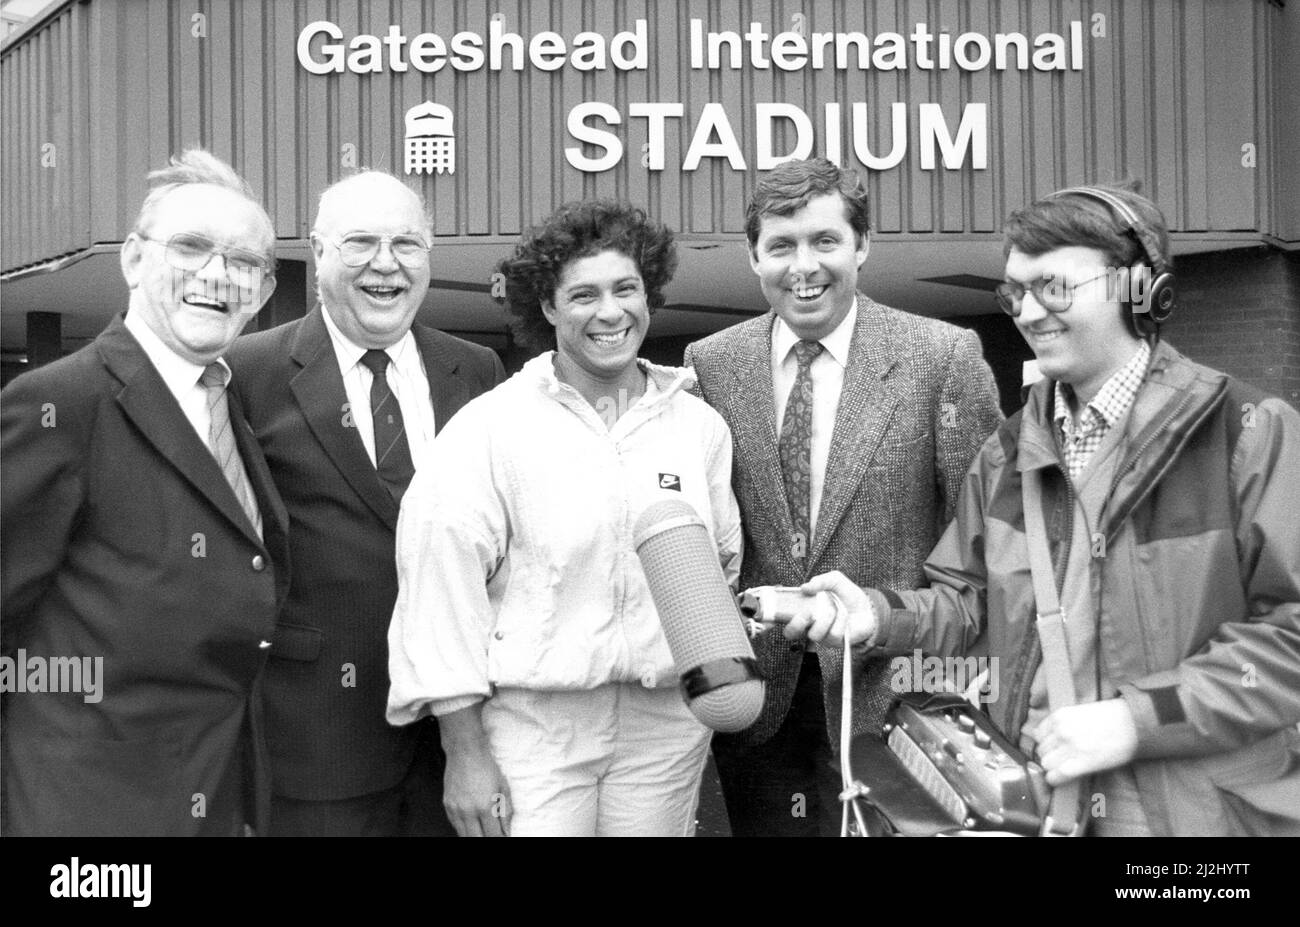 Fatima Whitbread arrives at Gateshead Stadium for a BBC Radio chat show, Left to right, Stan Long, Roy Cameron Direct of Gateshead Council, Fatima Whitbread, Brendan Foster and John Clarke from BBC Radio 4, October 1988. Stock Photo